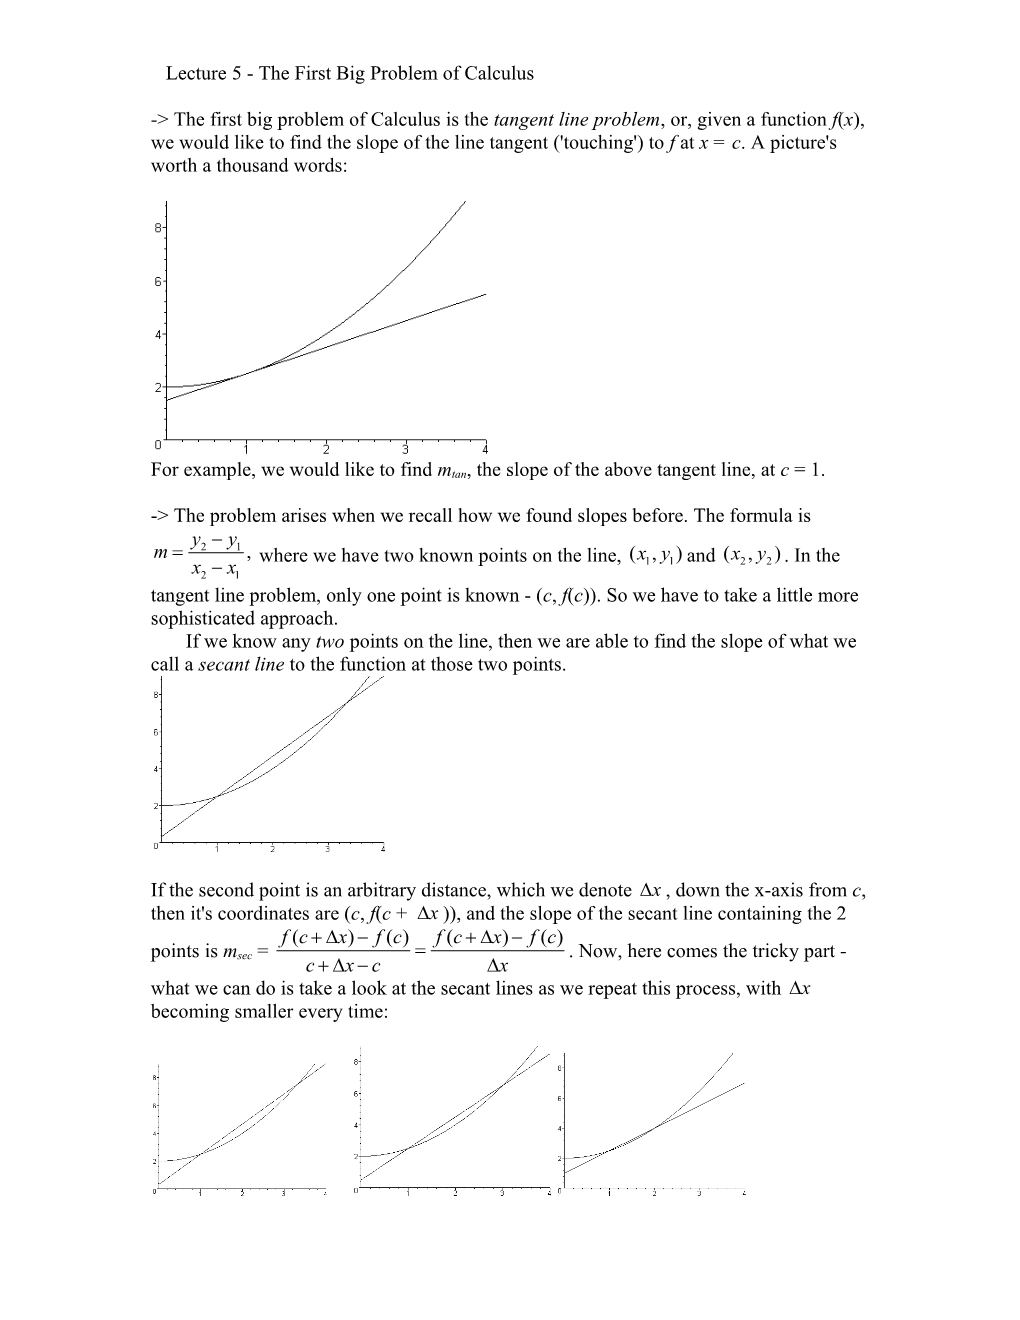 Lecture 5 - the First Big Problem of Calculus